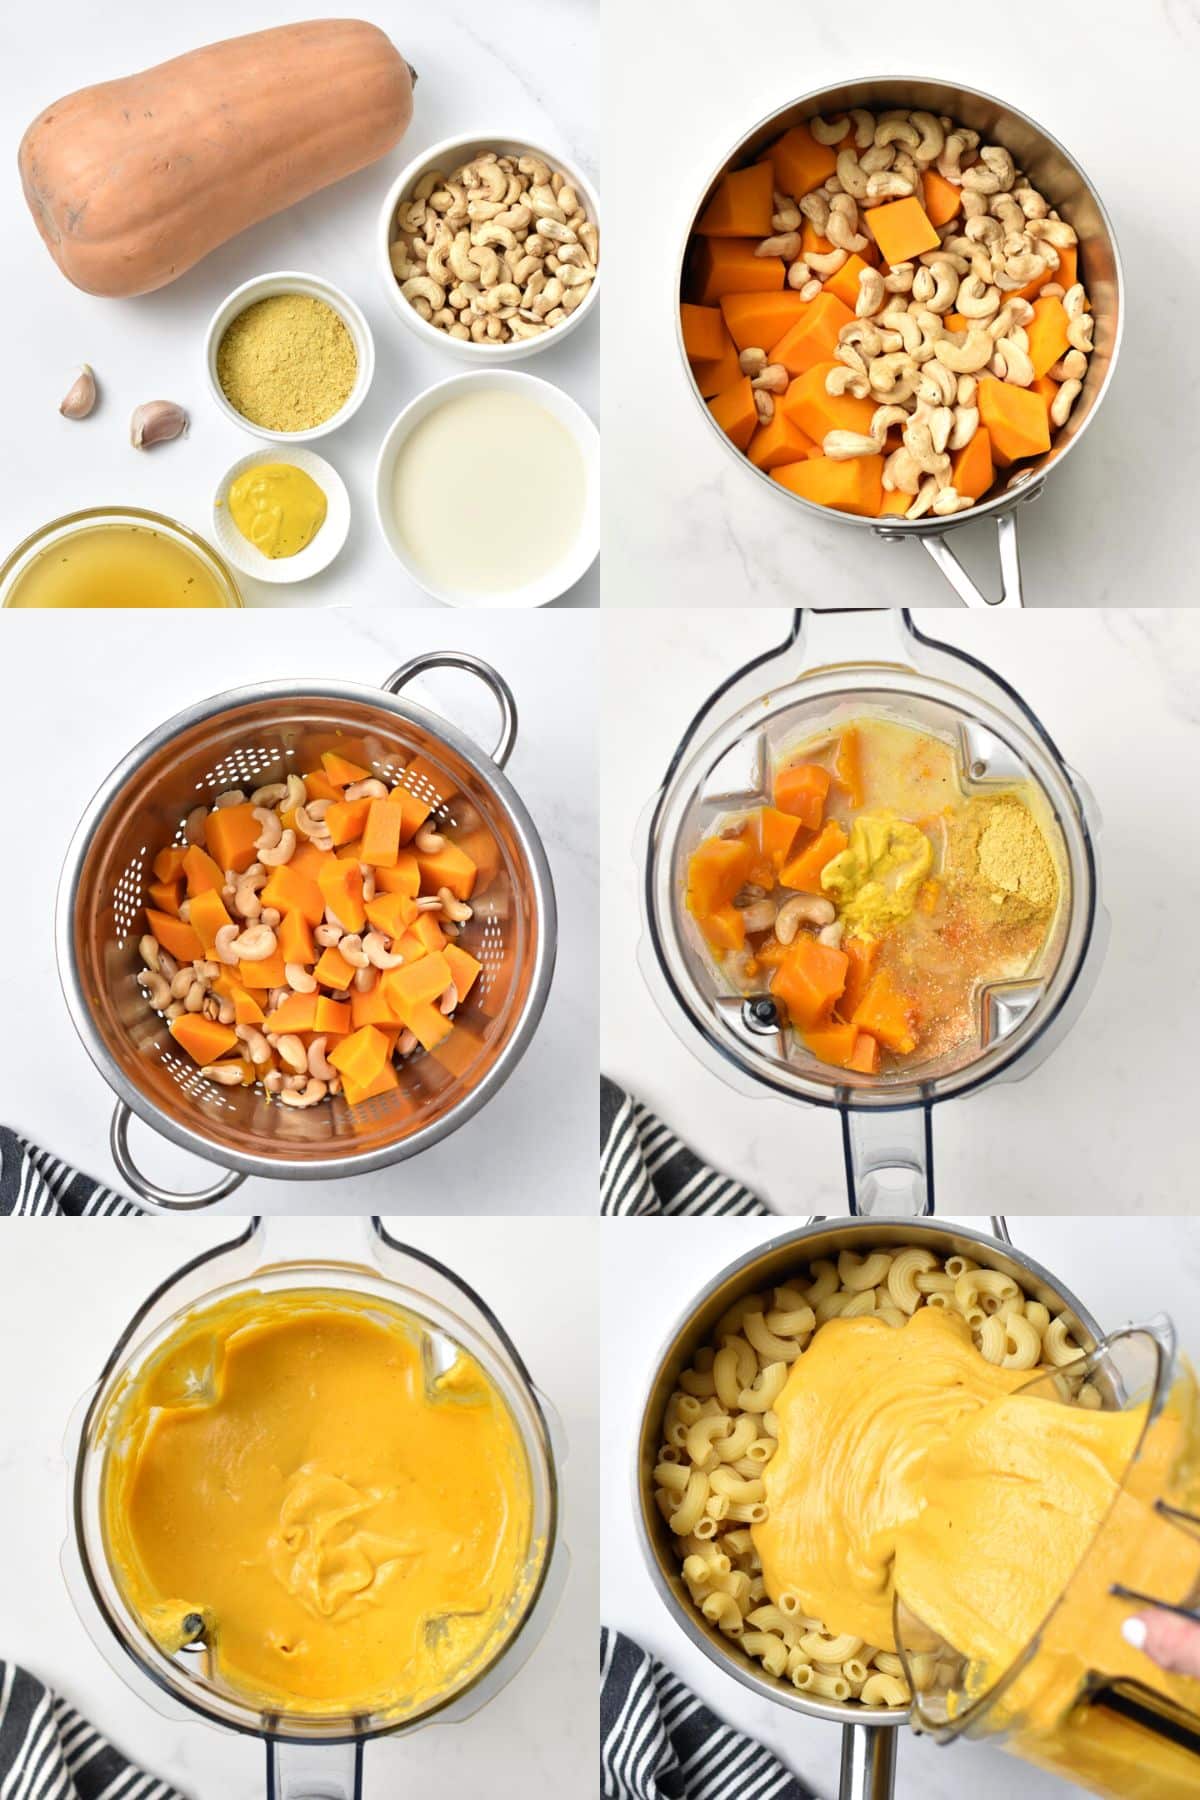 How to make Butternut Squash Mac And Cheese